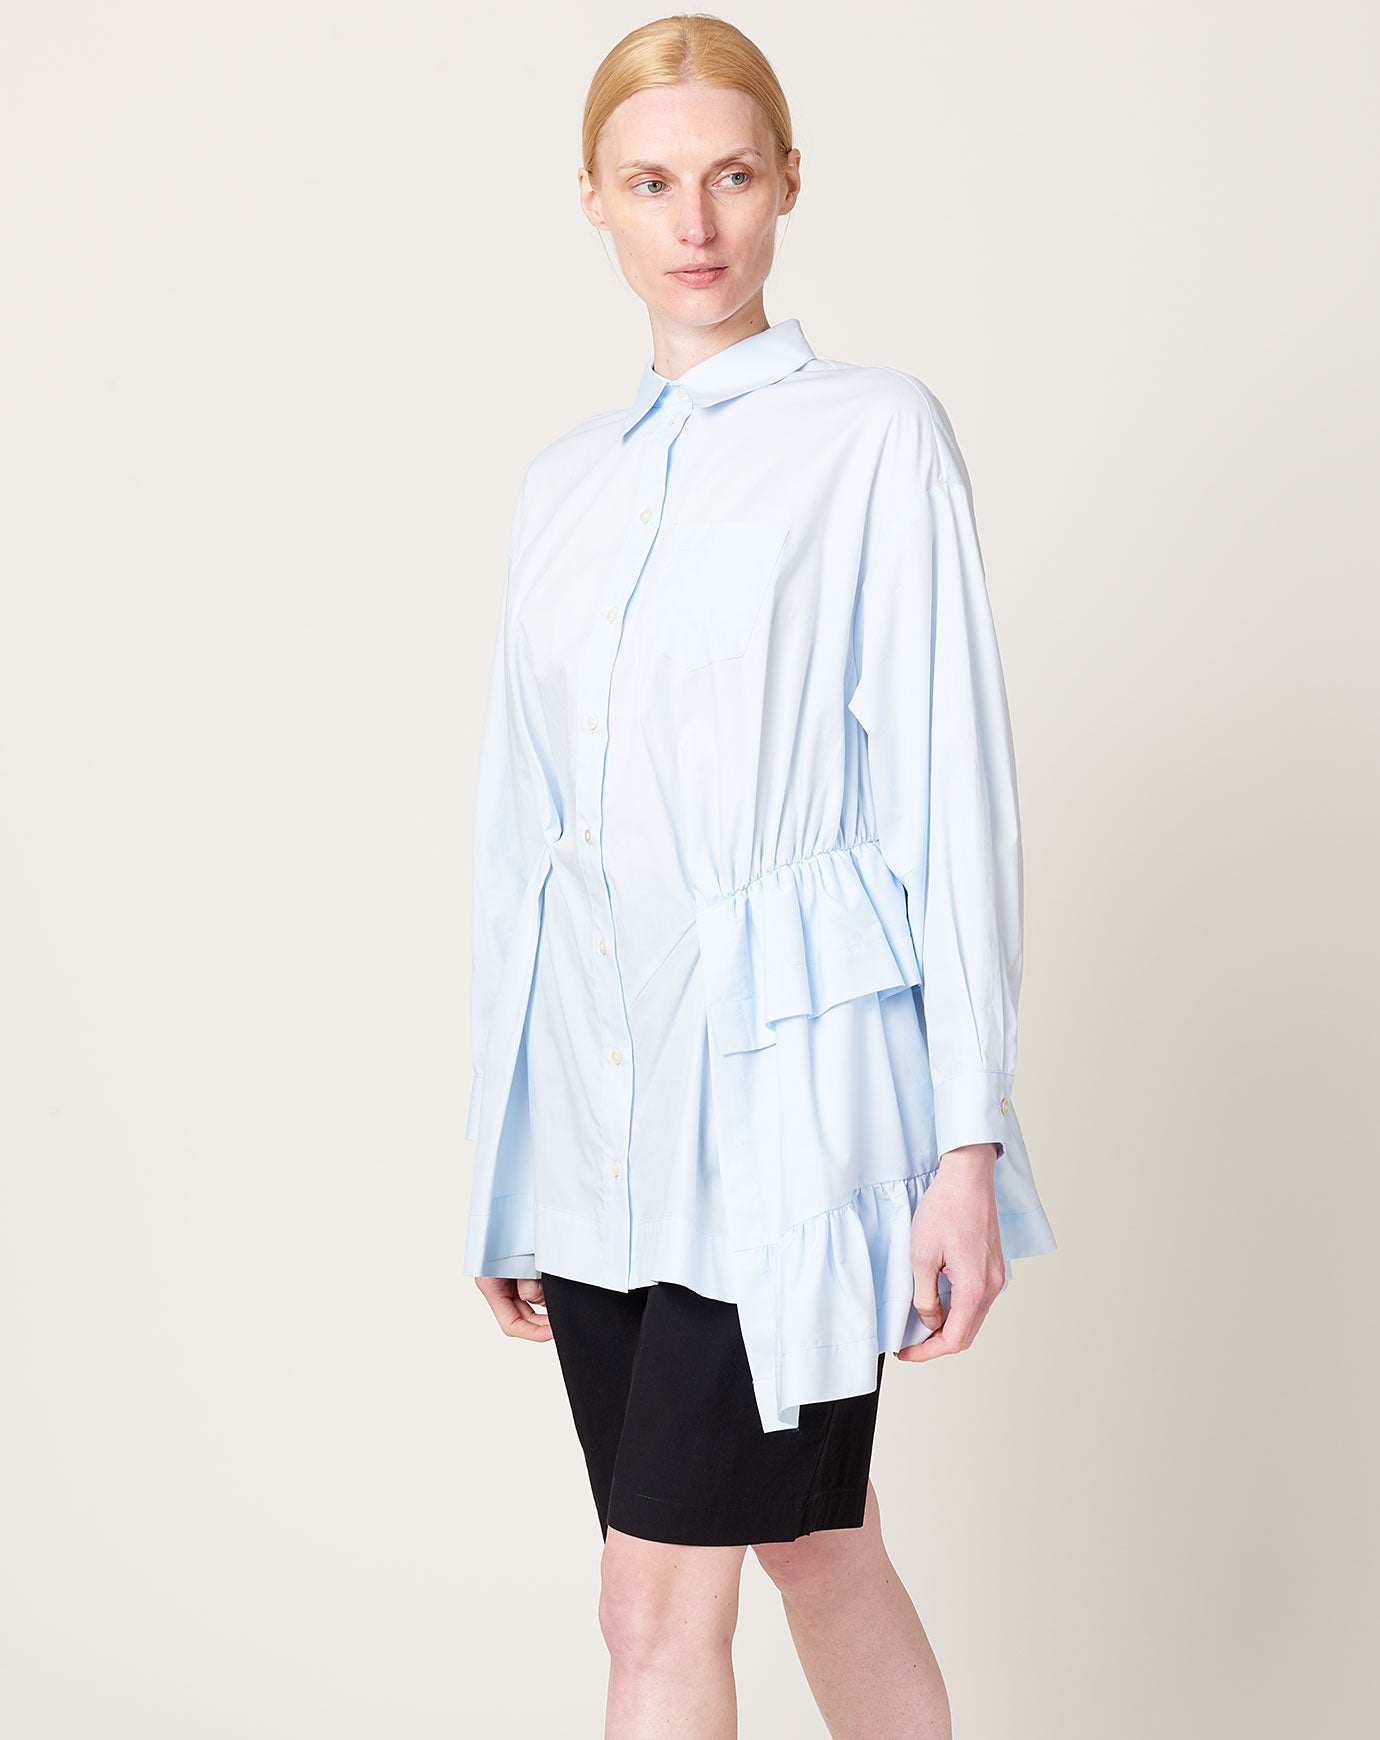 Sandy Liang Quattro Dress in Baby Blue